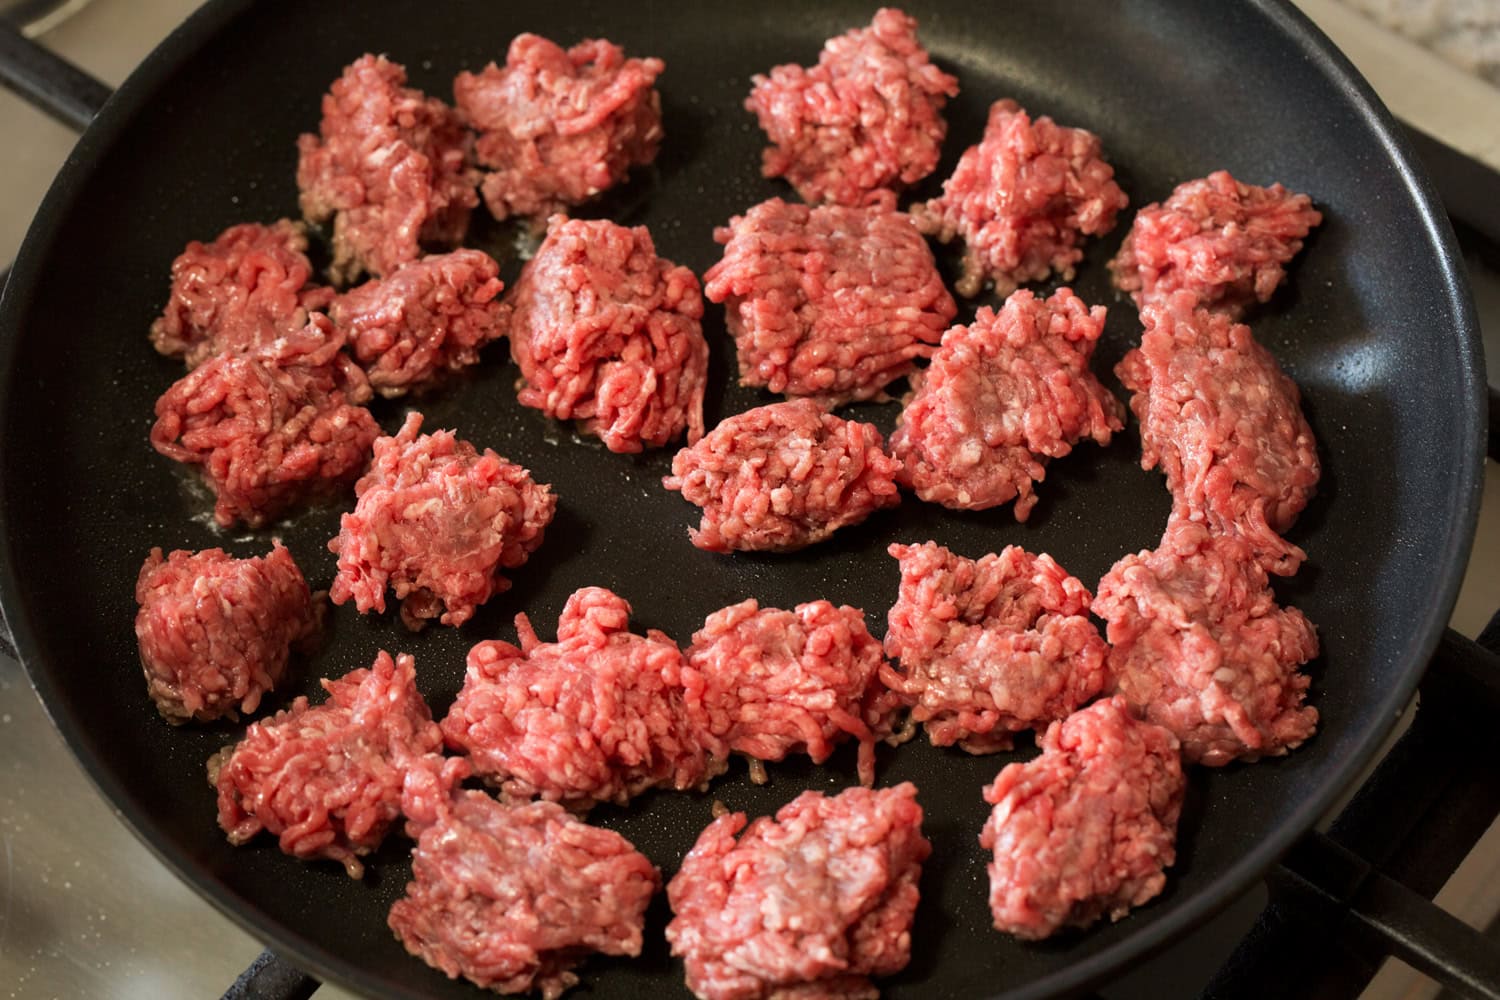 Raw ground beef added to a dark skillet in chunks.